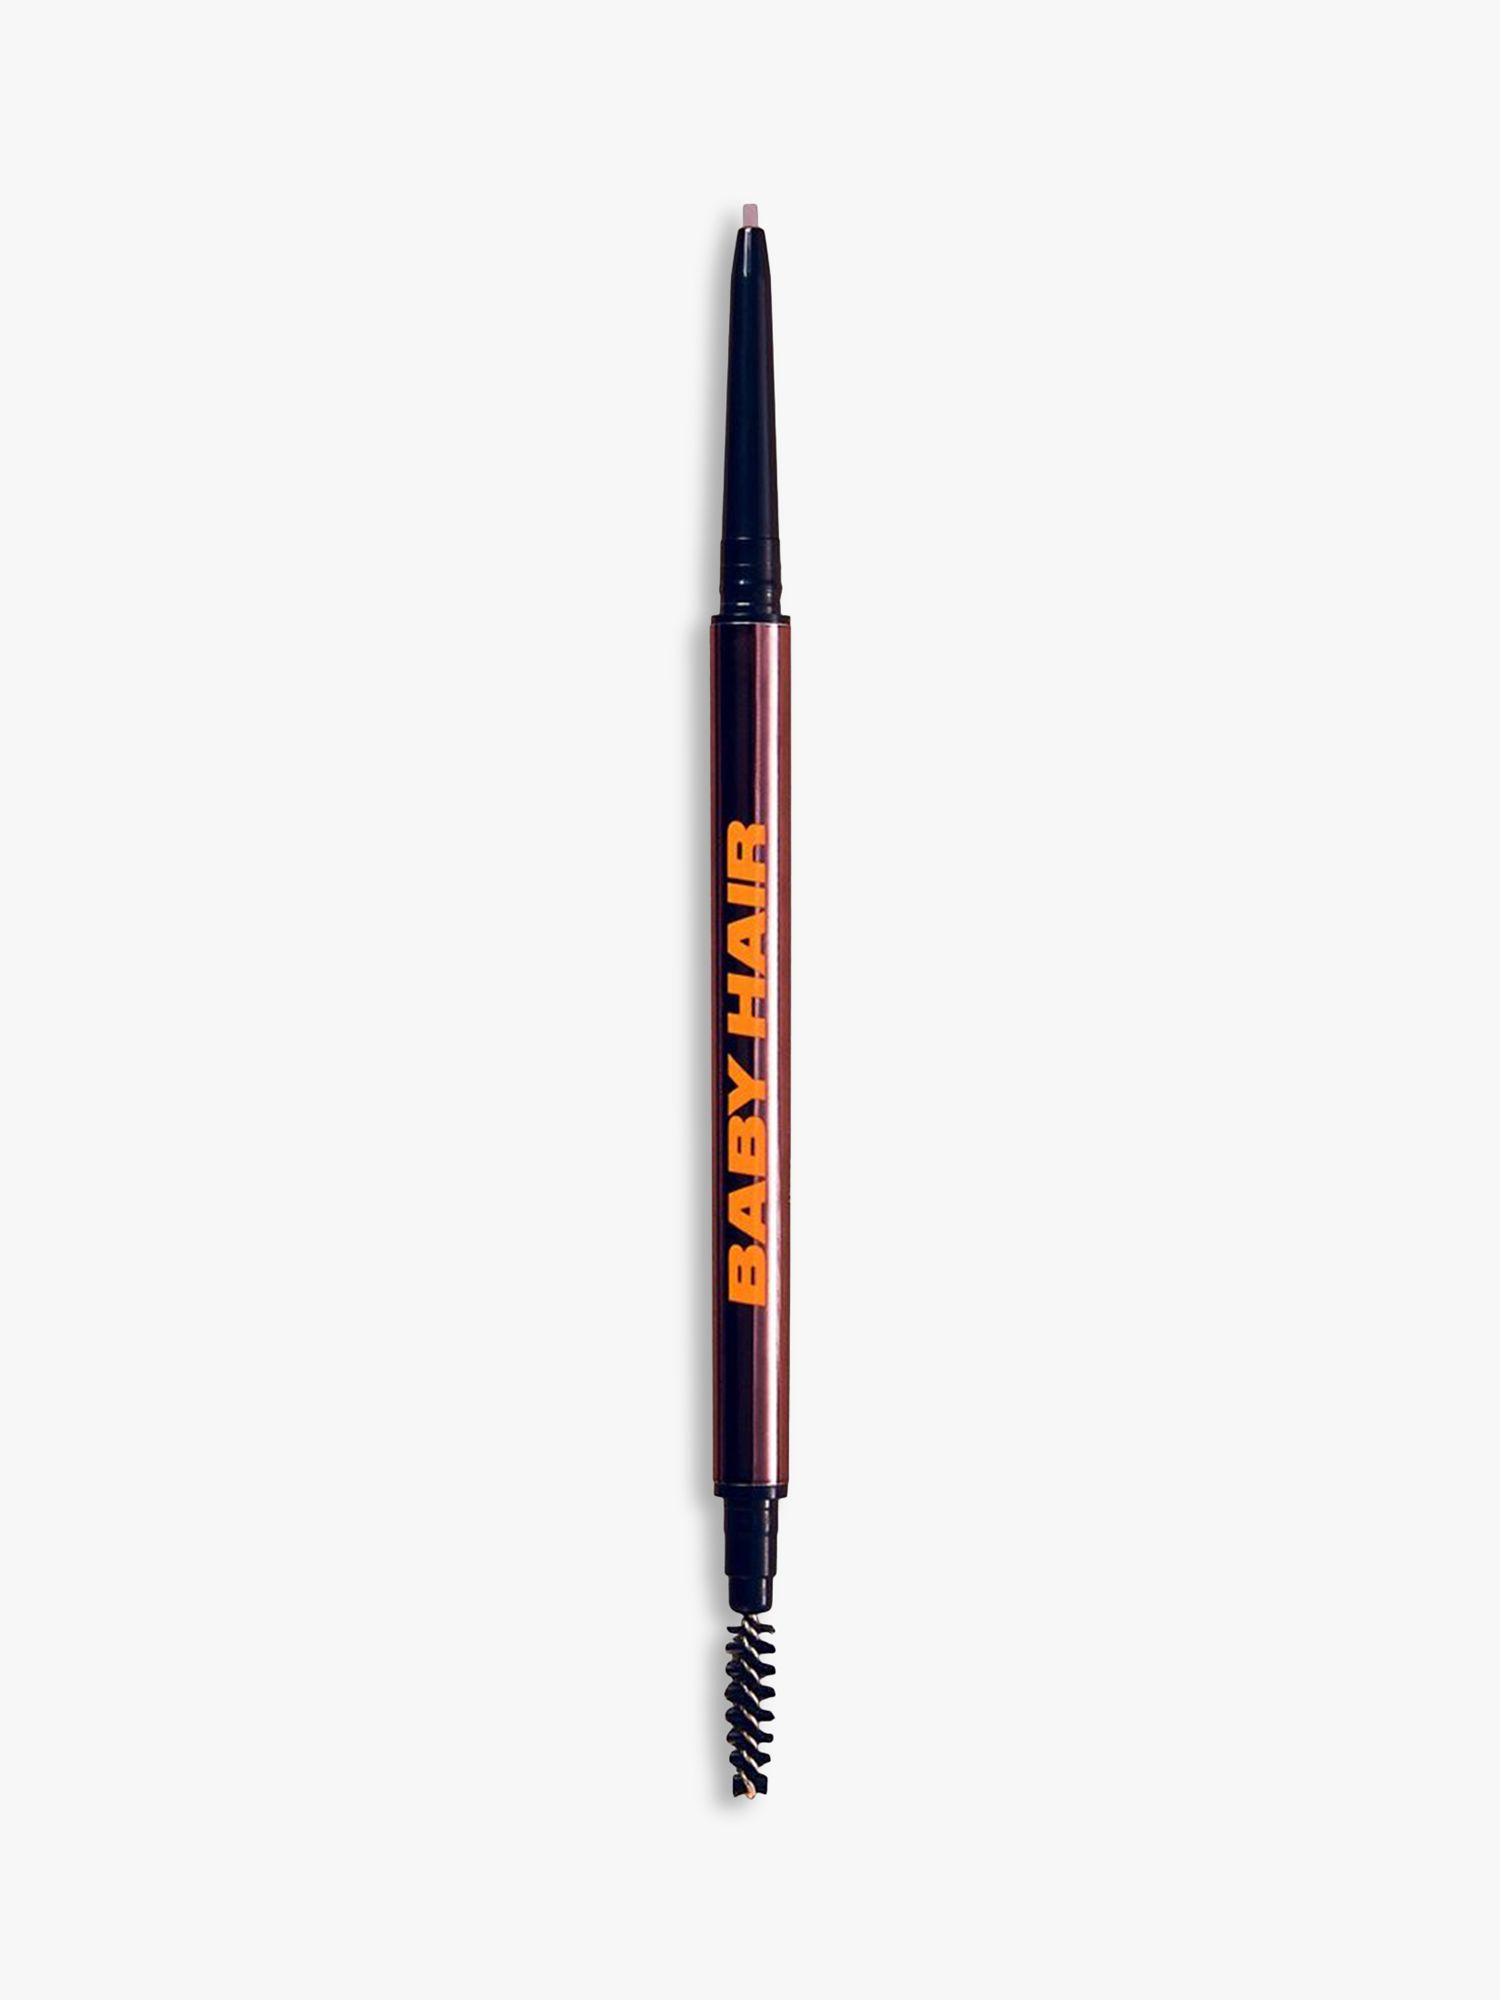 UOMA Beauty BROW-FRO BABY HAIR Brow Pencil, 01 Light Blonde 1